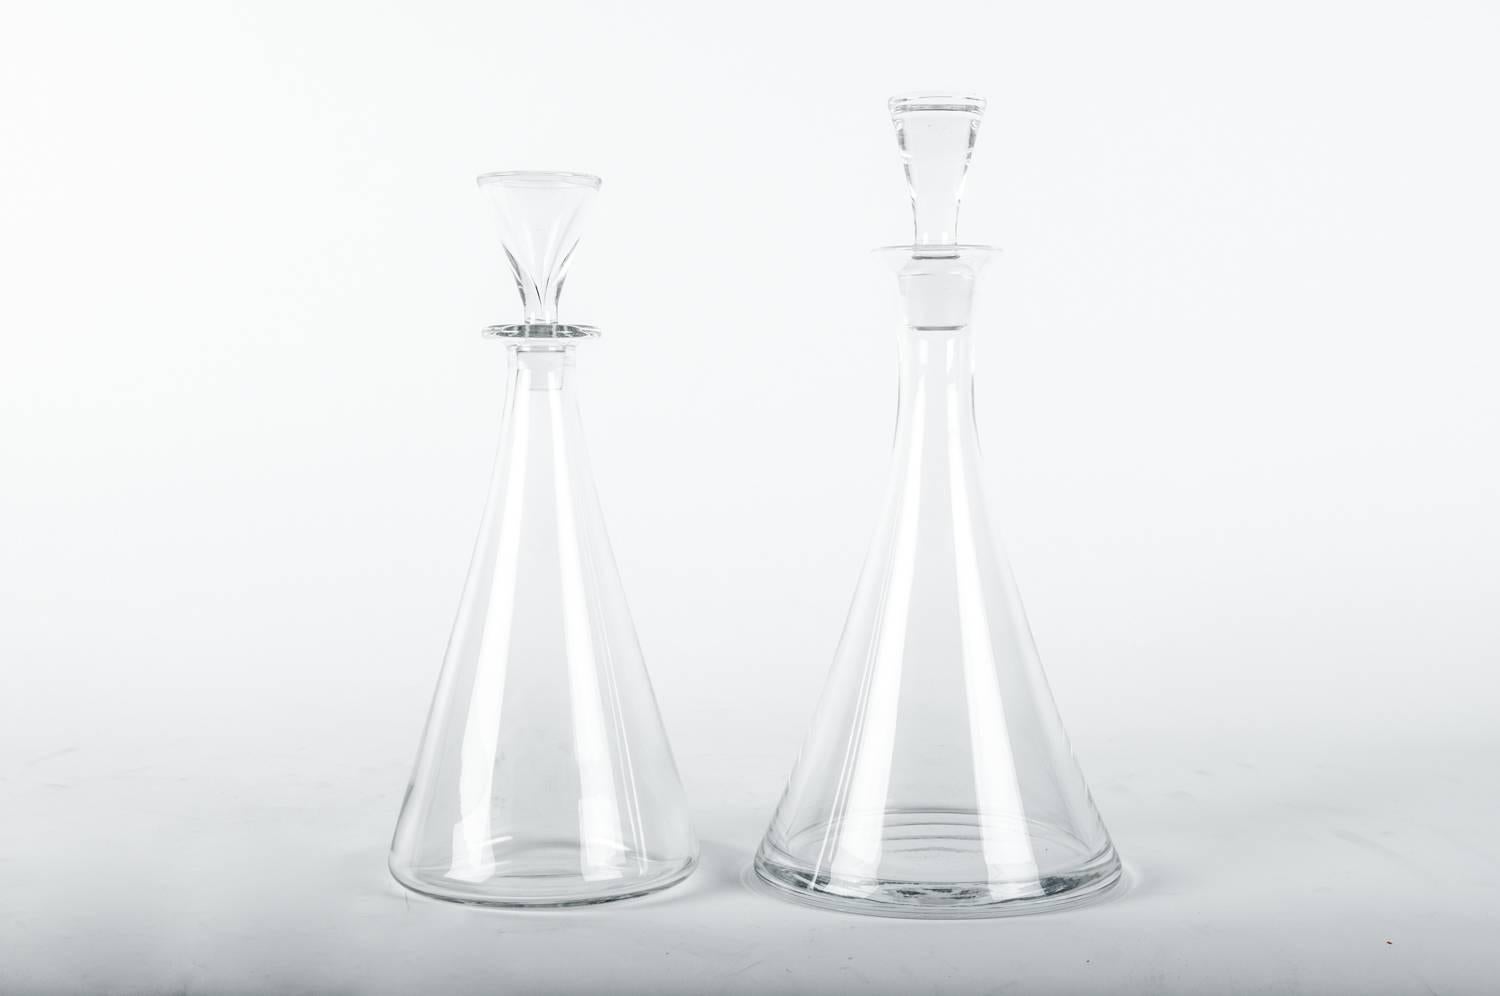 Mid-20th century pair of Baccarat crystal Art Deco style drinks decanter set. Each decanter is in excellent vintage condition. Taller decanter measure 13.5 inches high x 6 inches base diameter. The shorter one measure 12 inches high x 5 inches base